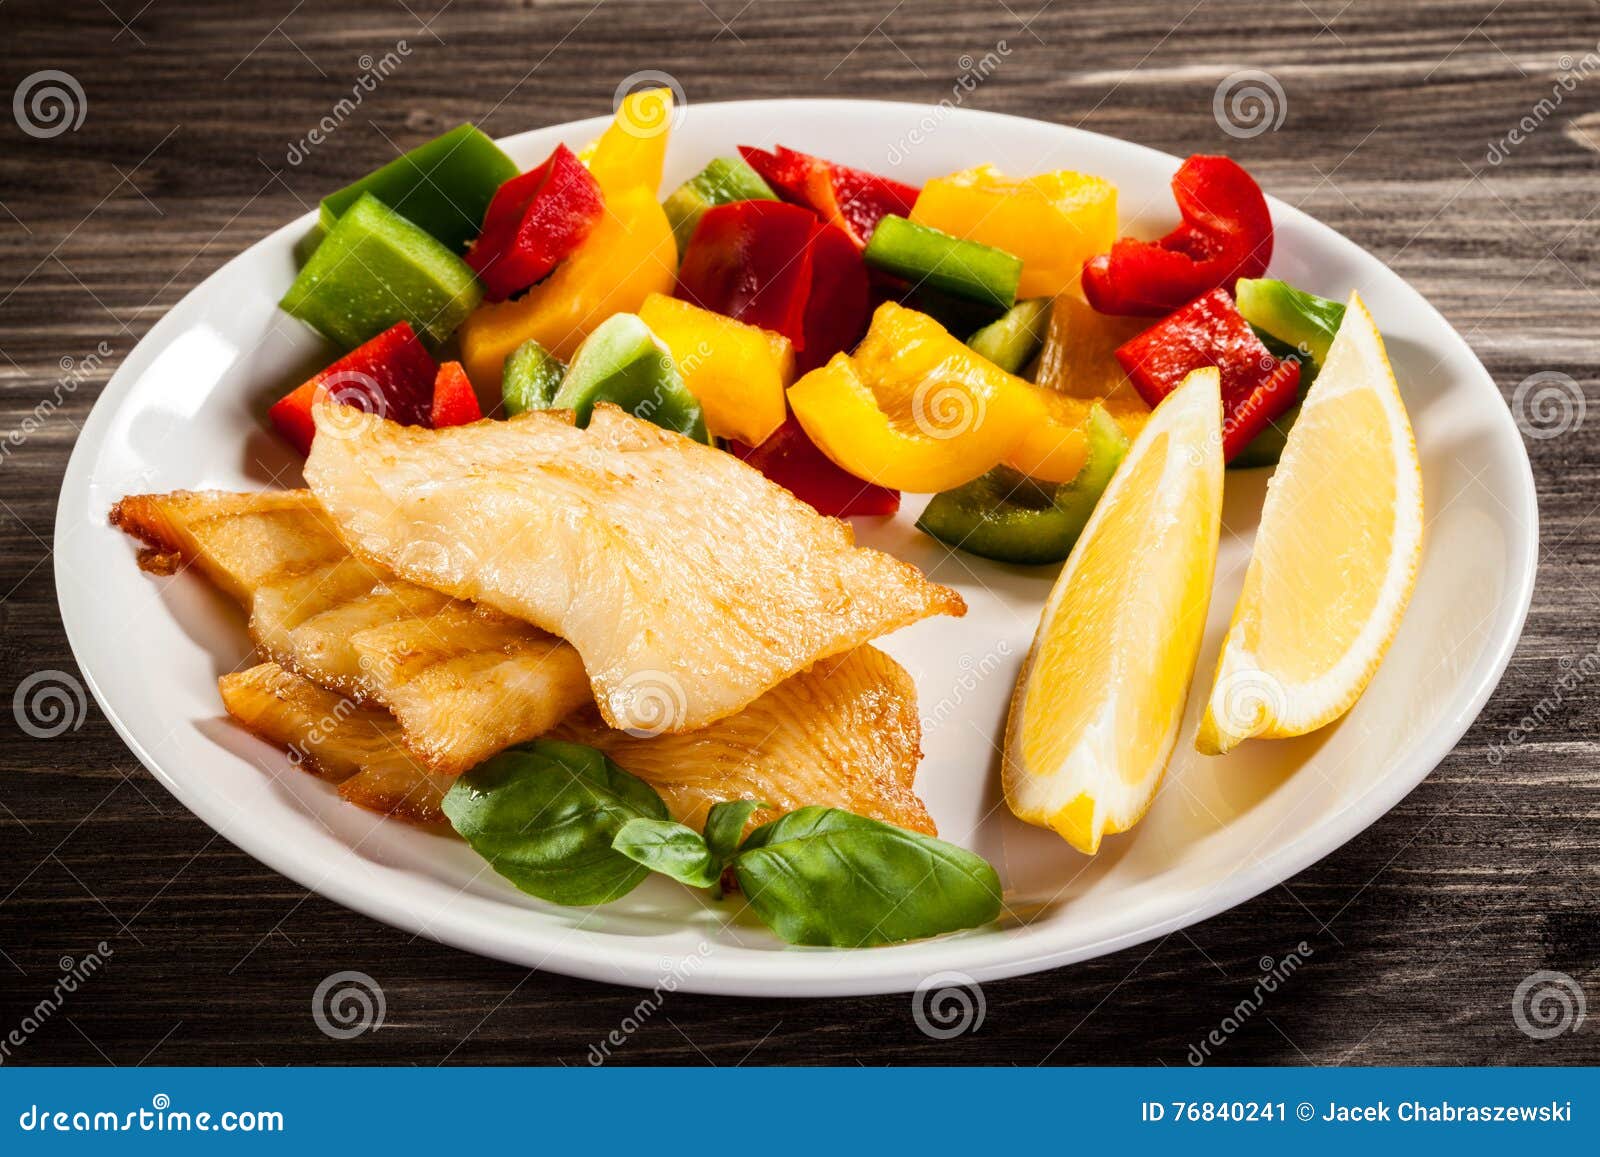 Grilled chicken nuggets stock image. Image of fillet - 76840241